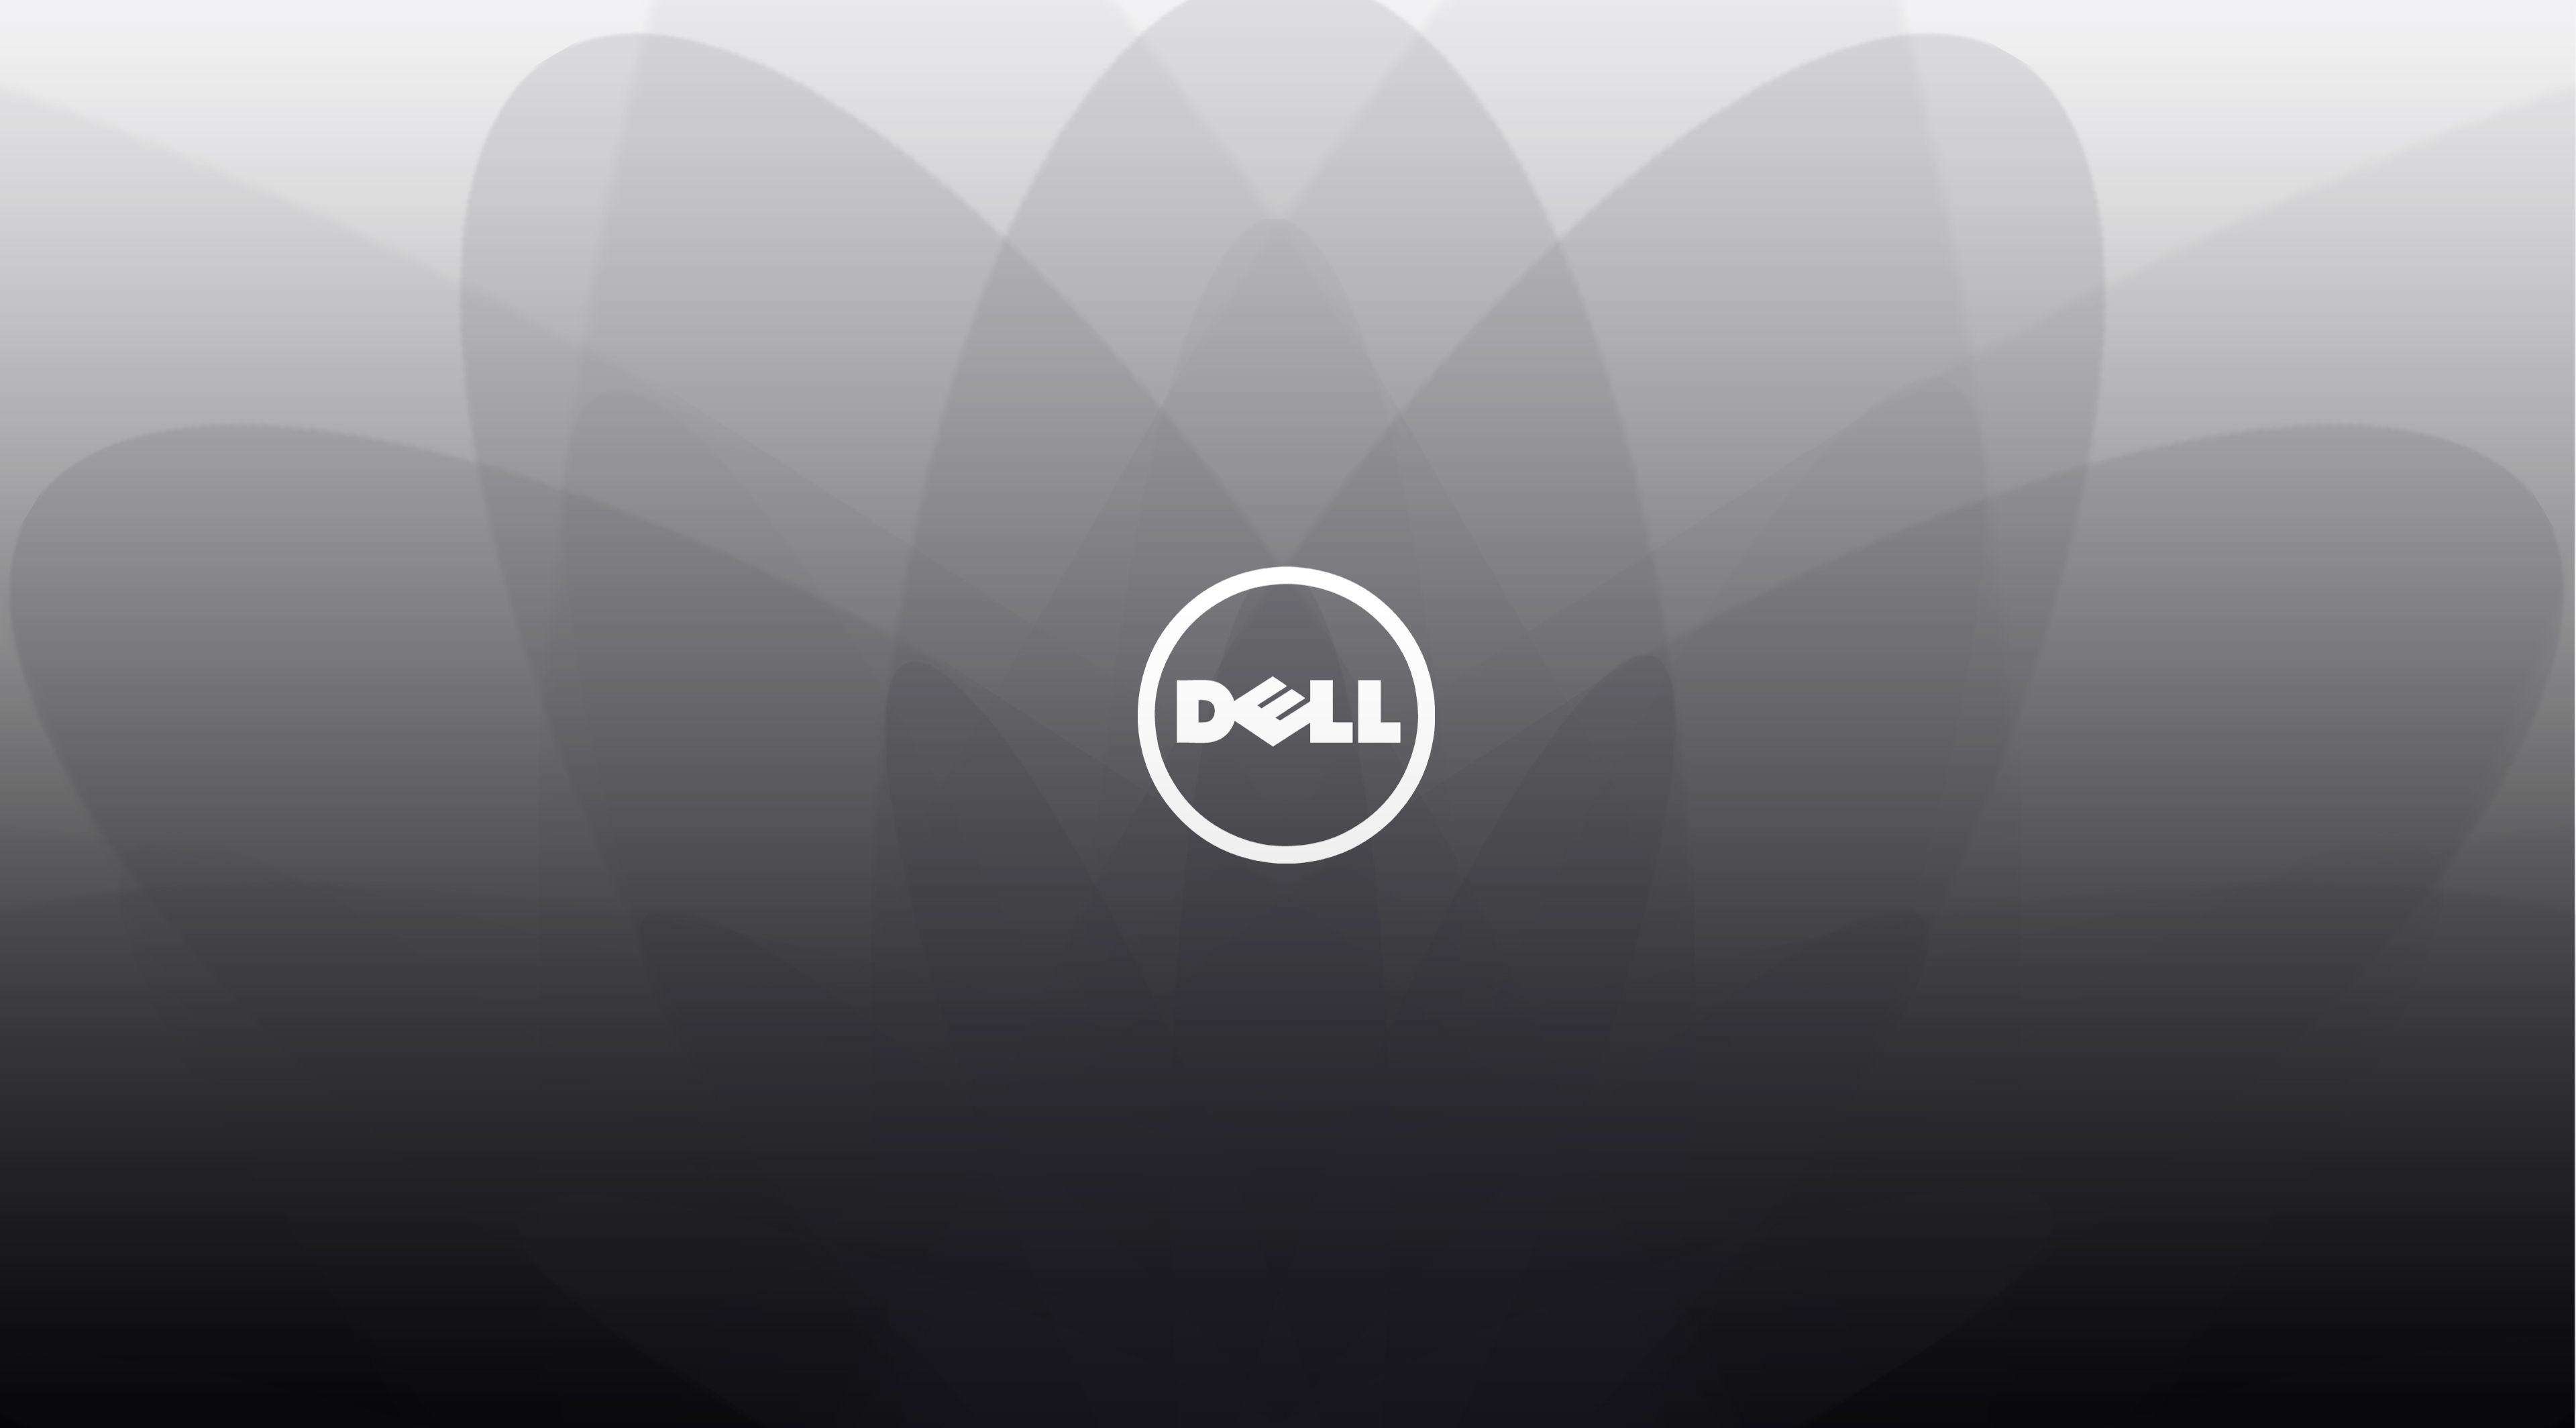 Dell G3 Wallpaper Top Background